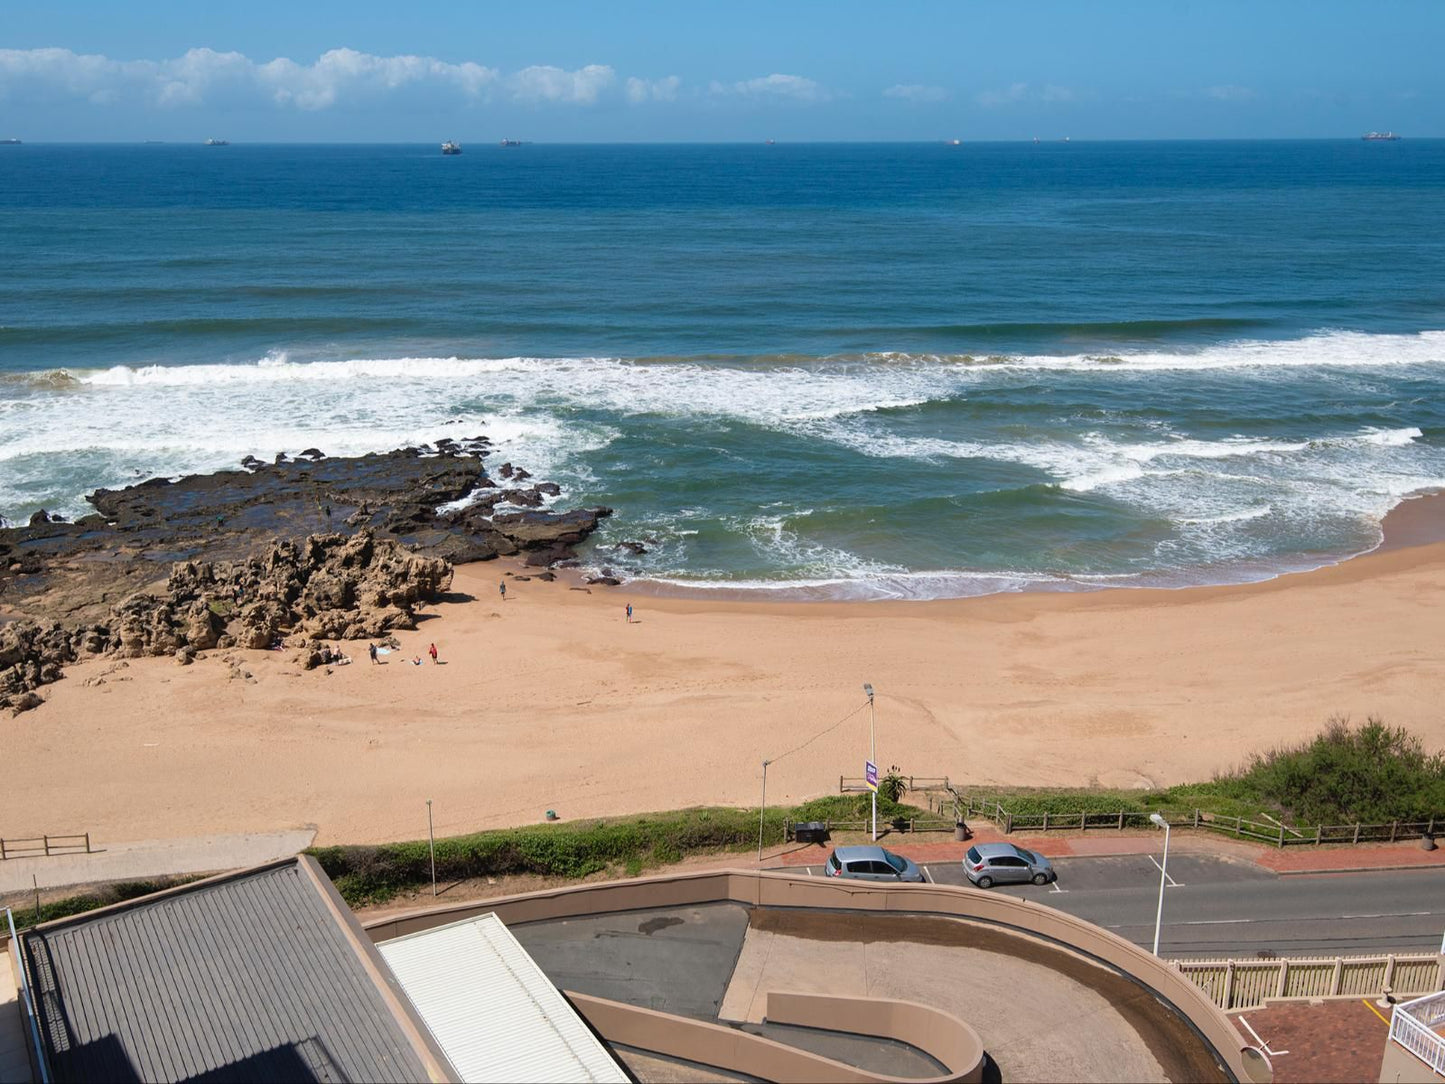 Escape To Our Happy Place On Umdloti Beach Umdloti Beach Durban Kwazulu Natal South Africa Complementary Colors, Beach, Nature, Sand, Cliff, Wave, Waters, Ocean